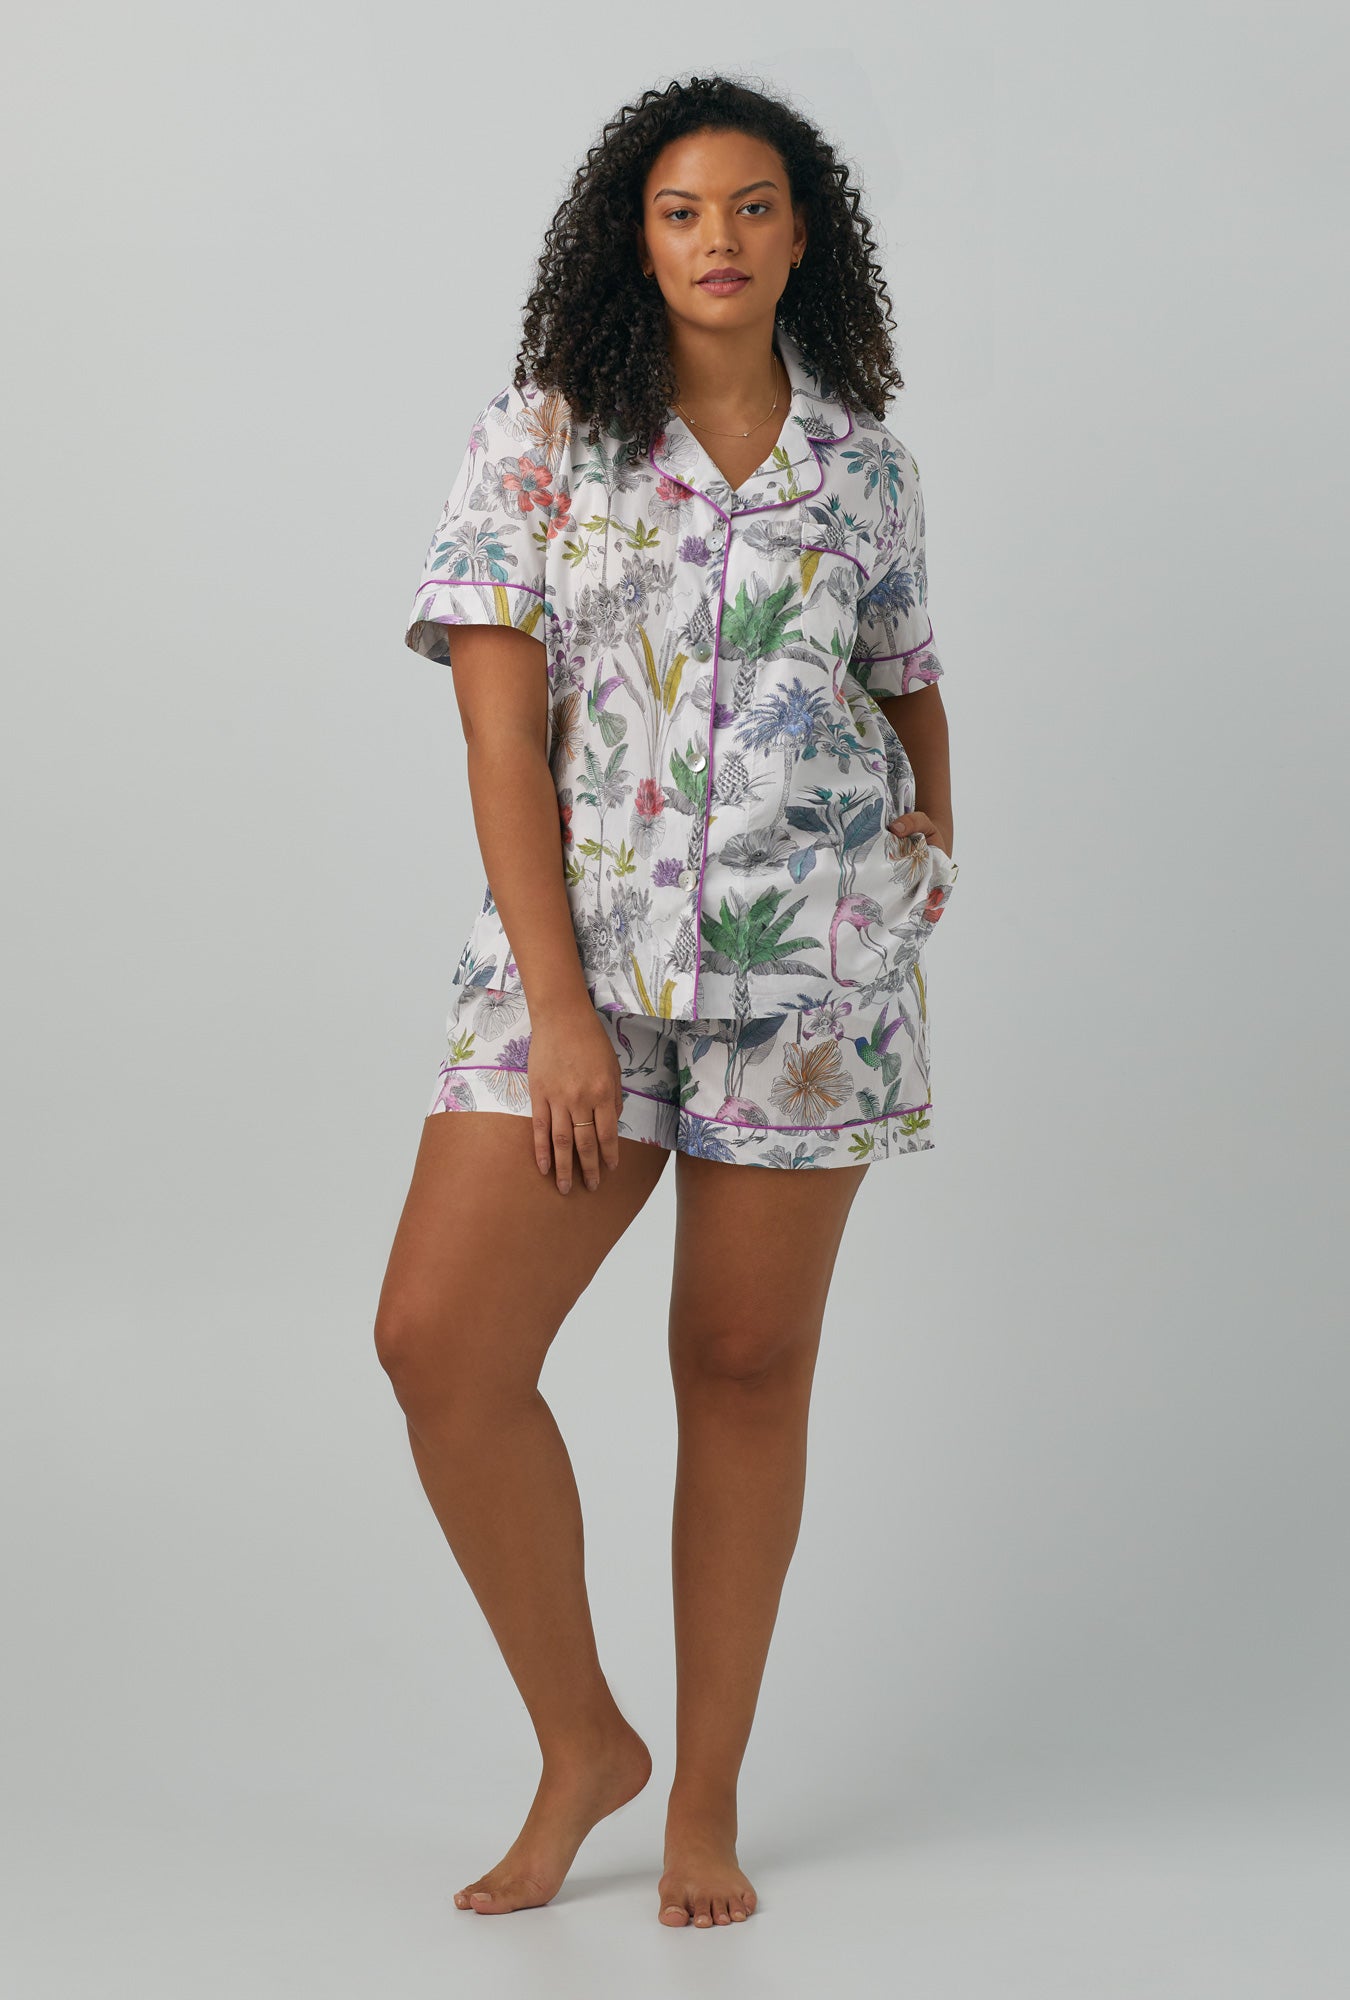 A lady wearing multi color Short Sleeve Classic Woven Cotton Shorty PJ Set with Darwin's Journey print